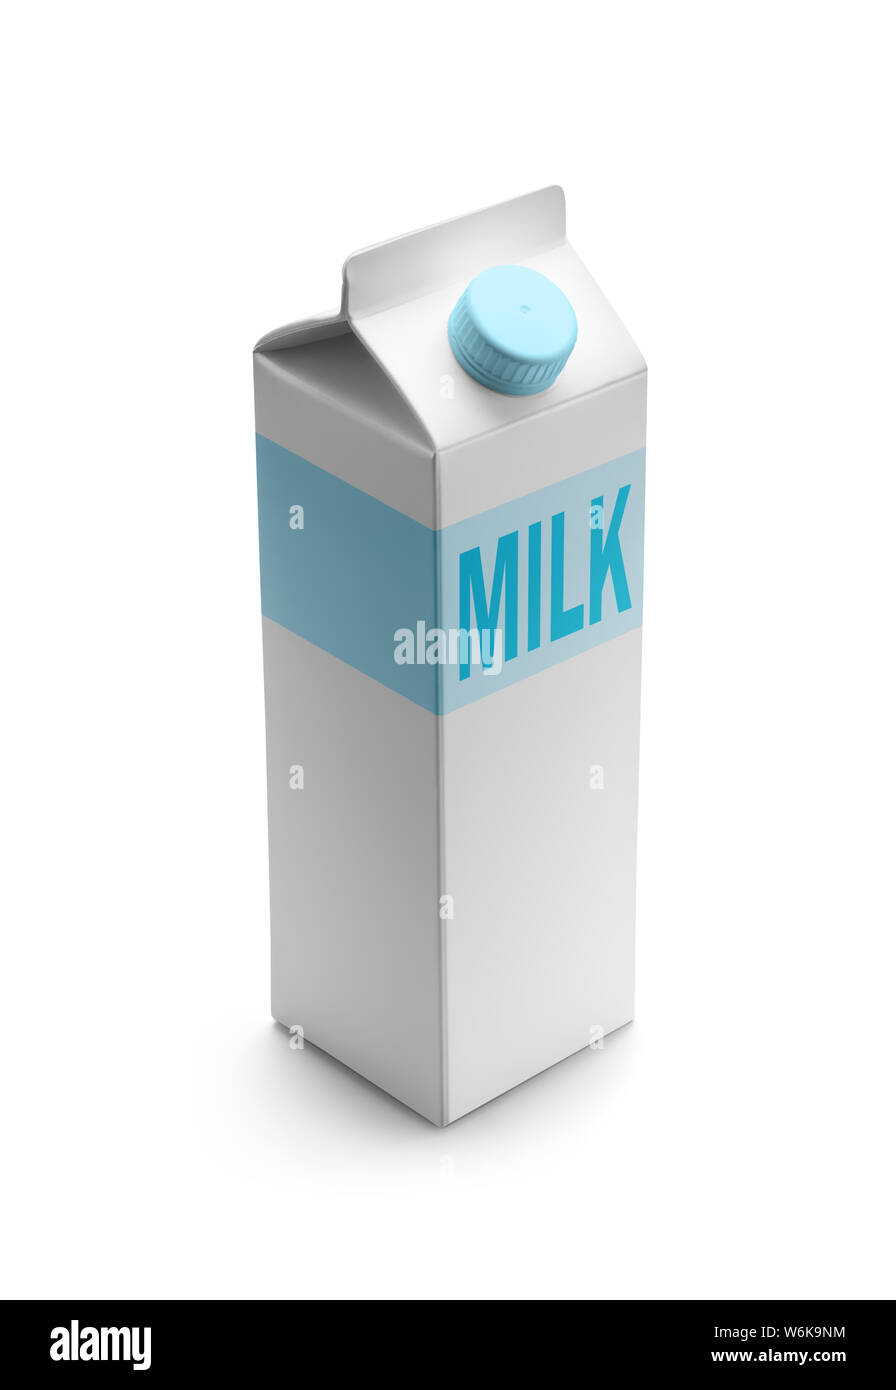 Milk packaging isolated on white background Stock Photo